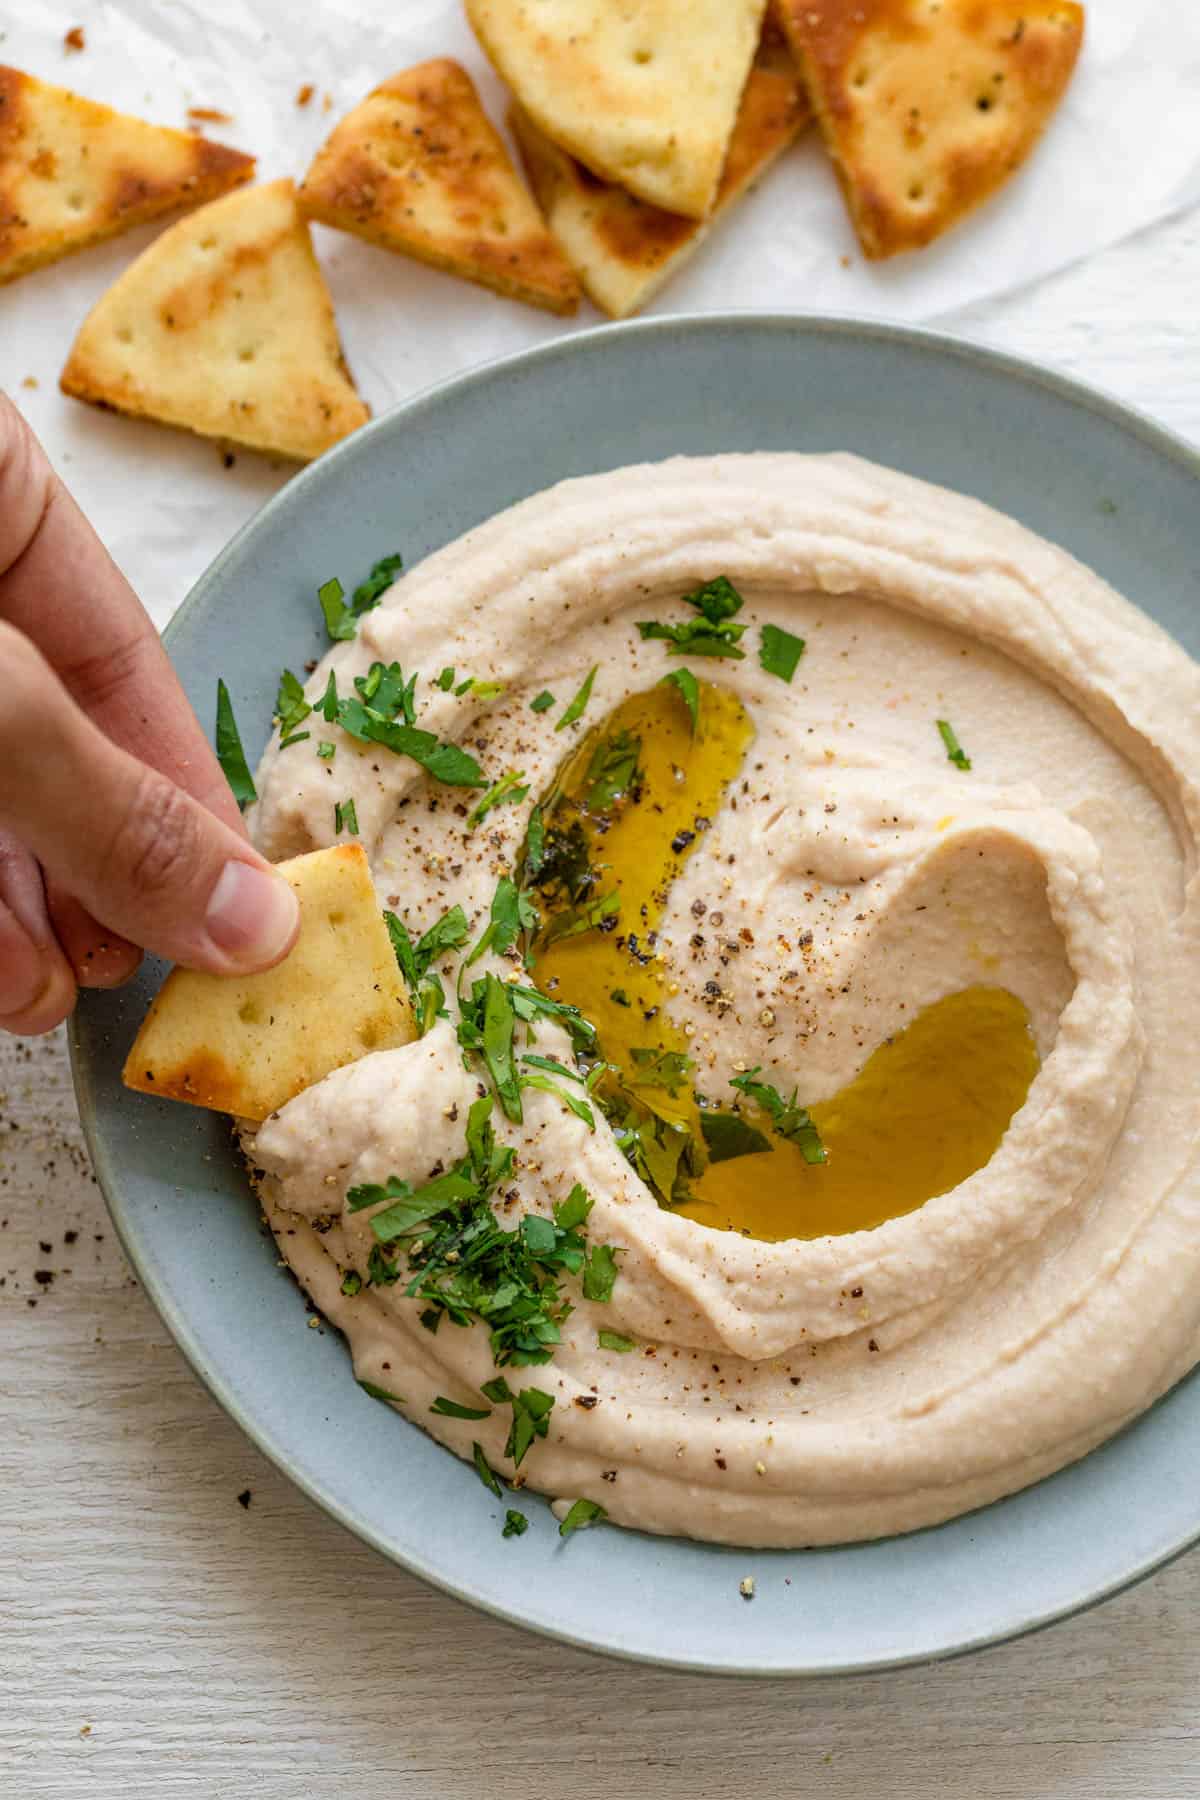 White bean hummus with pita chip dipping into it